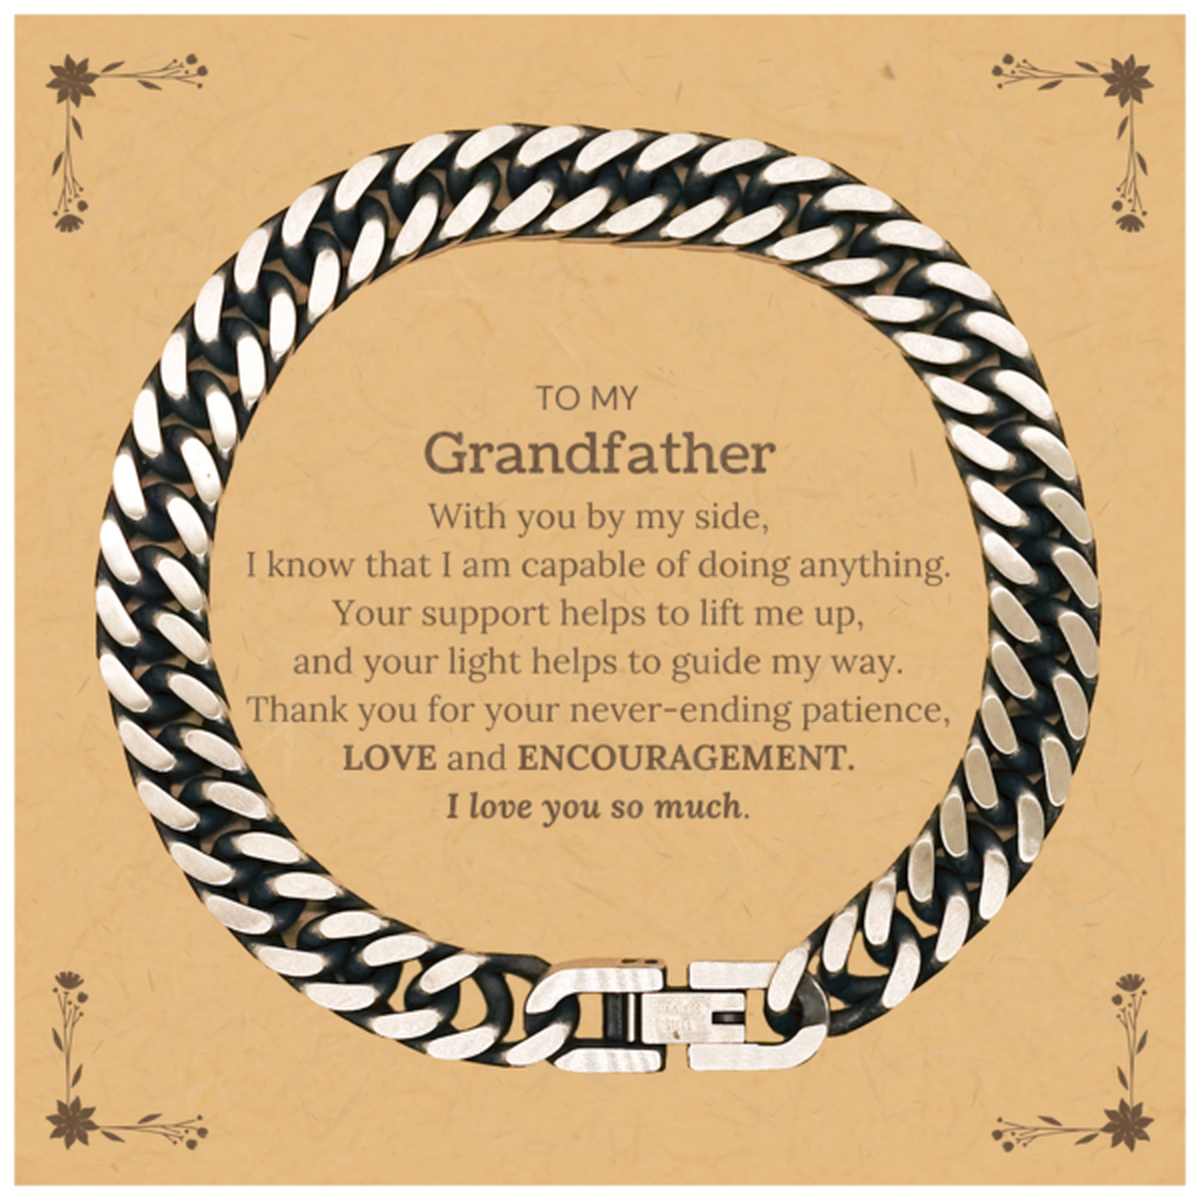 Appreciation Grandfather Cuban Link Chain Bracelet Gifts, To My Grandfather Birthday Christmas Wedding Keepsake Gifts for Grandfather With you by my side, I know that I am capable of doing anything. I love you so much